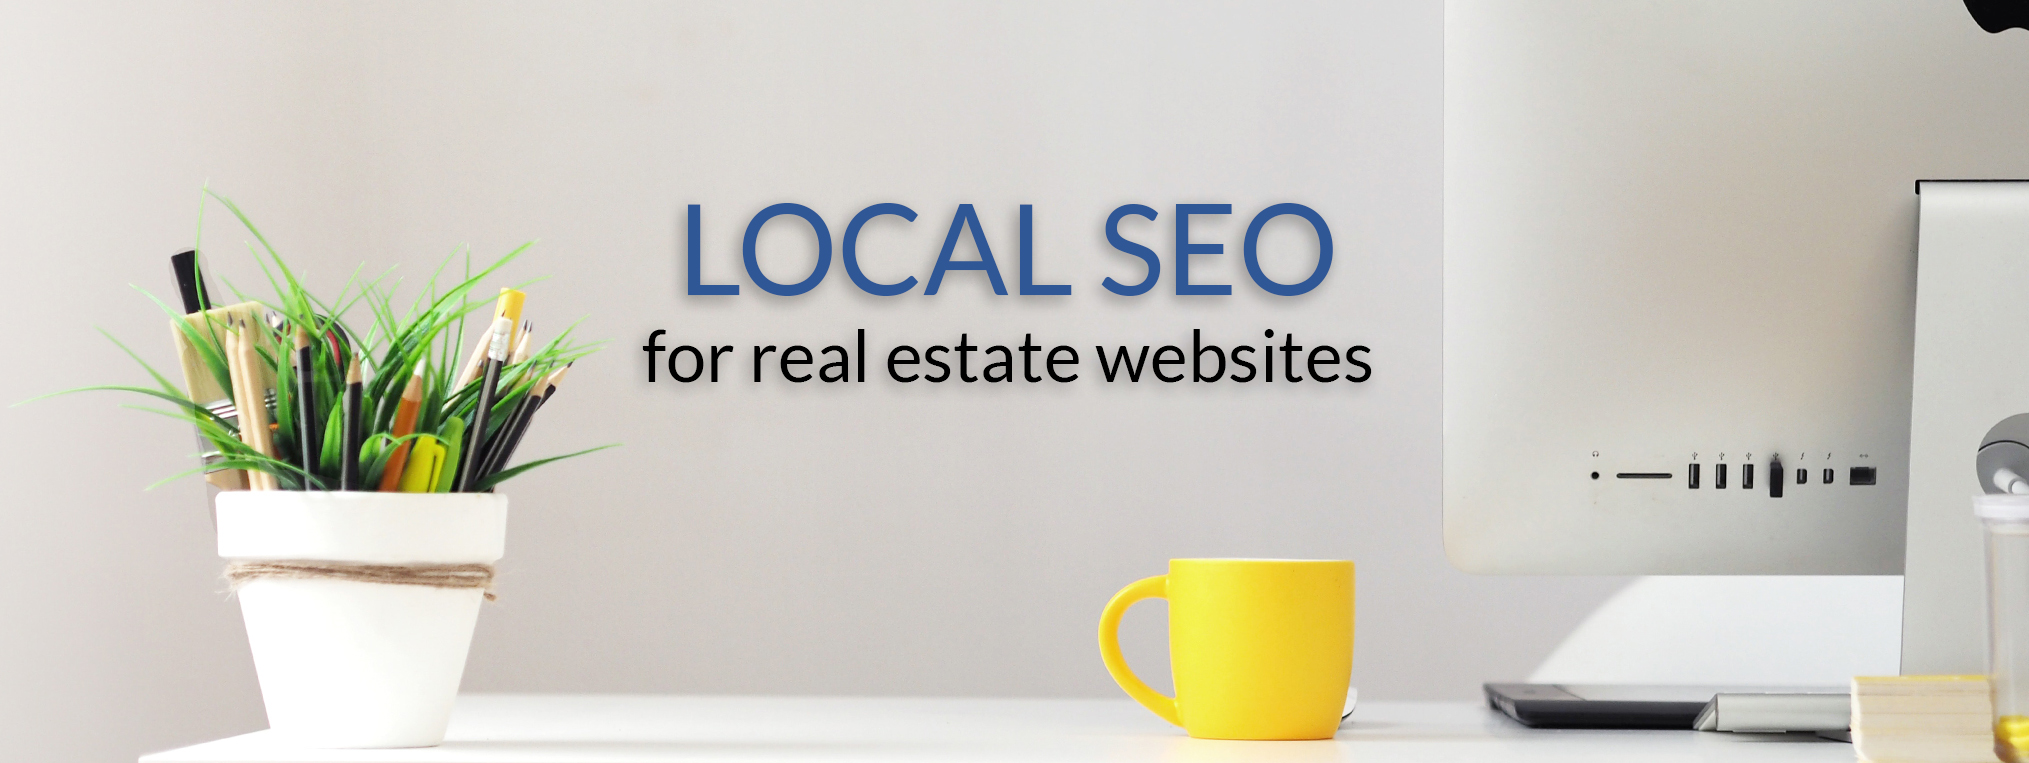 SEO for Real Estate: Benefits and Strategies for Agents - Propacity Blog